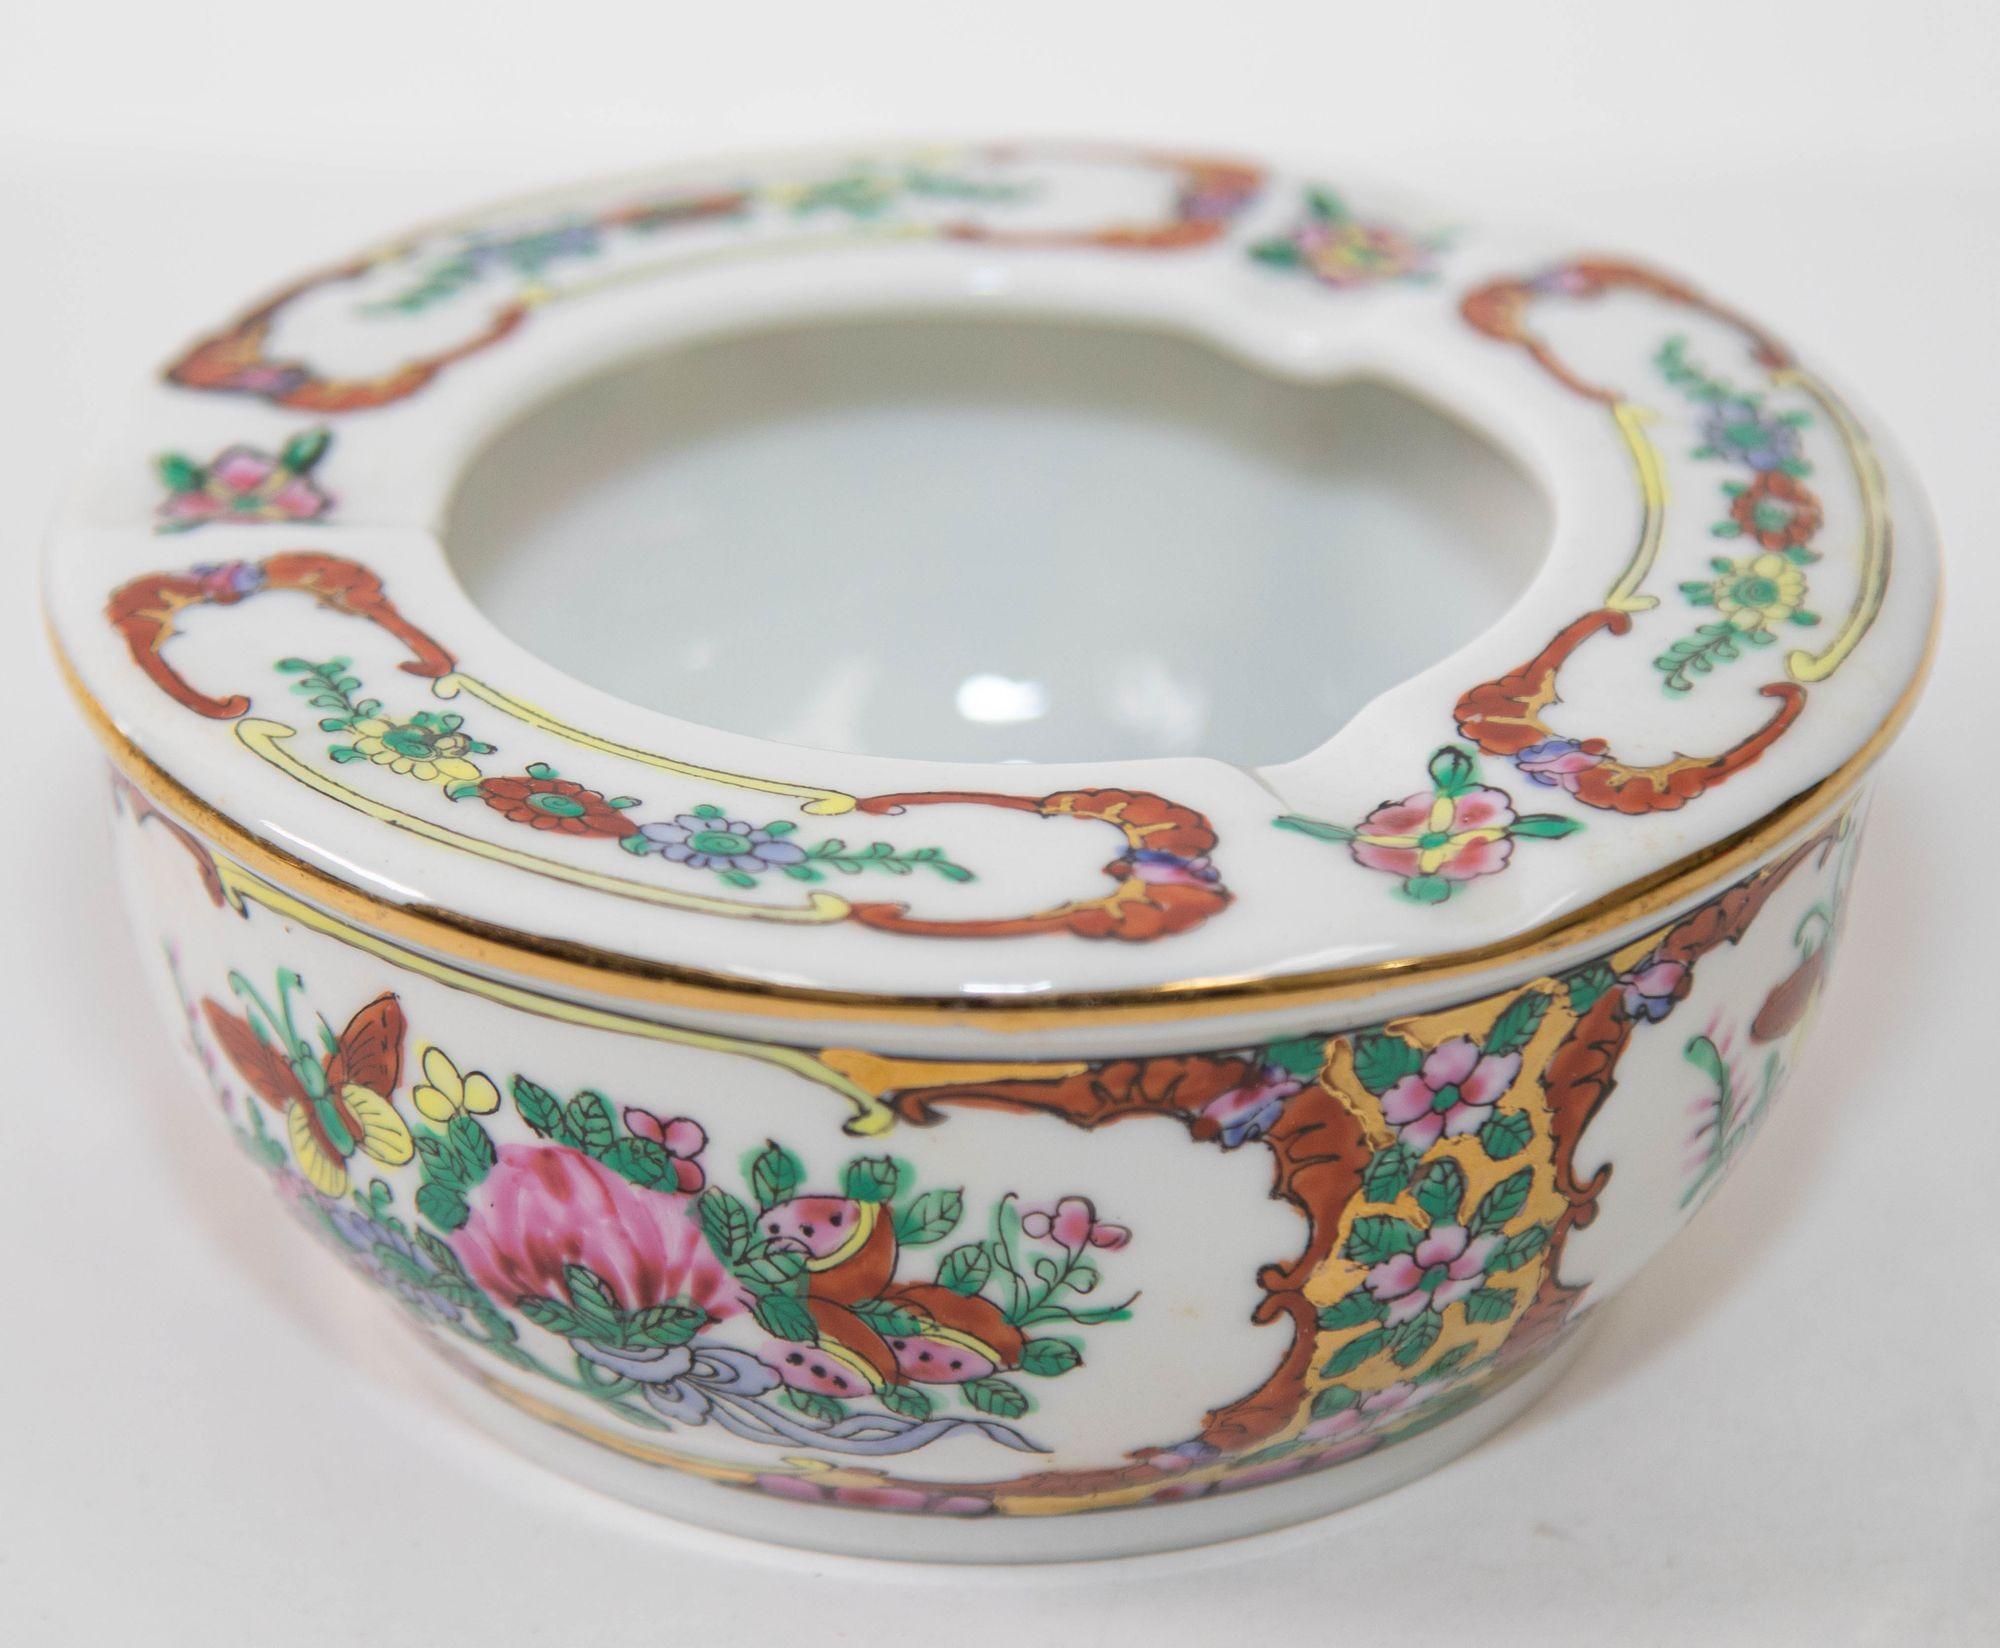 This vintage Asian porcelain hand painted floral ashtray was handmade in China.
This gorgeous gilded ashtray is intricately hand painted with Asian floral lotus decoration in gilt and geometric design on white background in blue, pink, red, green